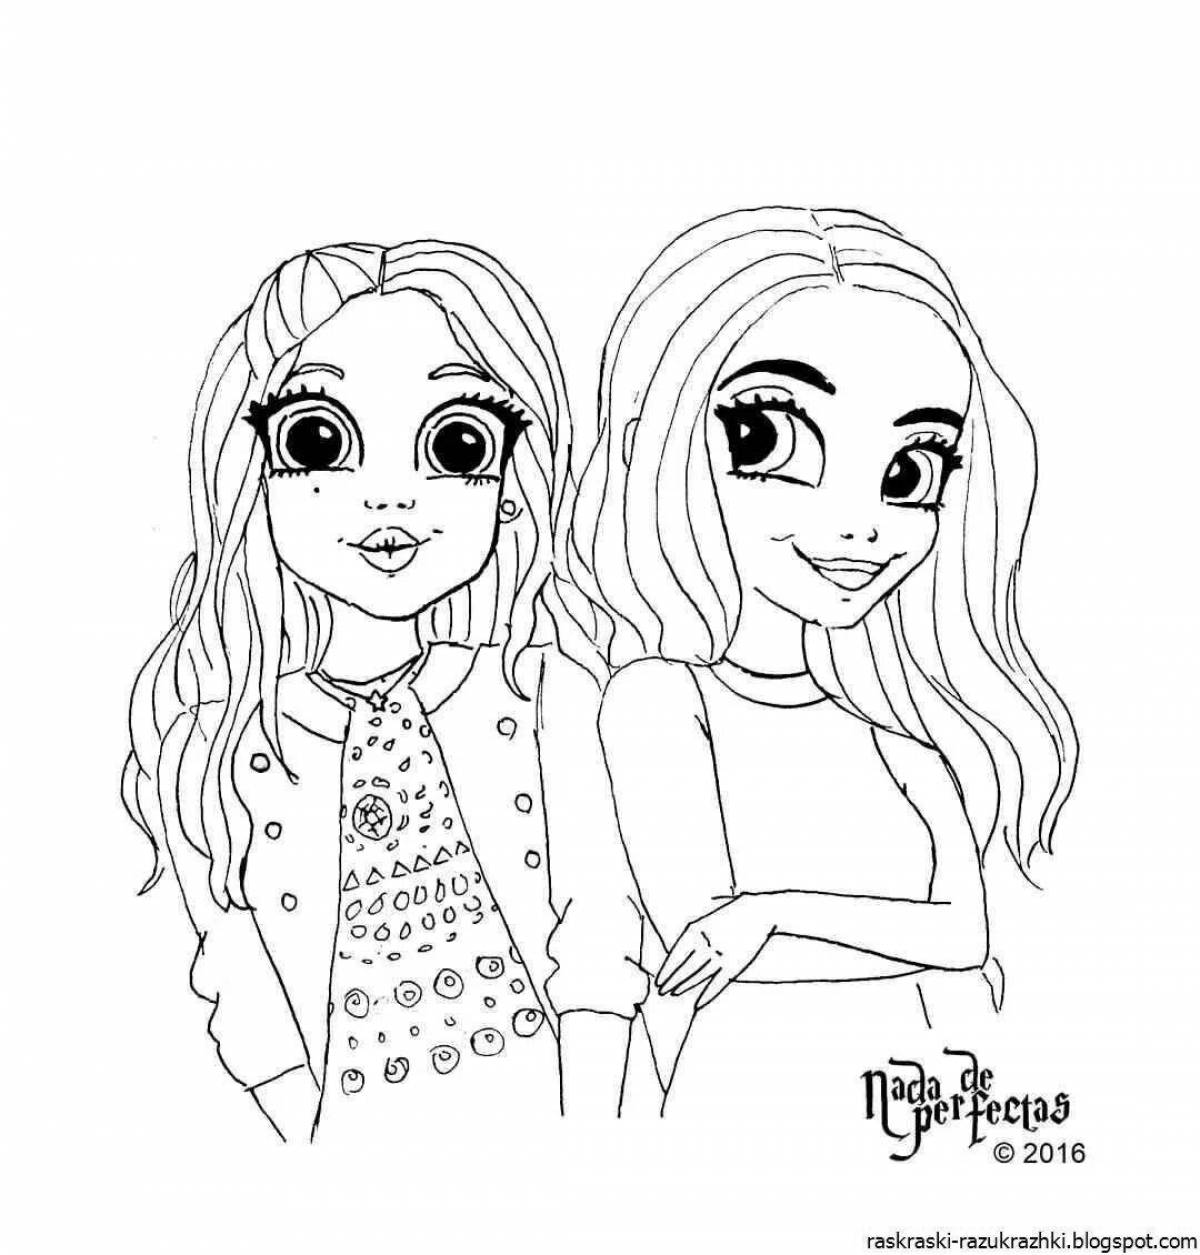 Fabulous coloring page for girls 12 years old cool lp